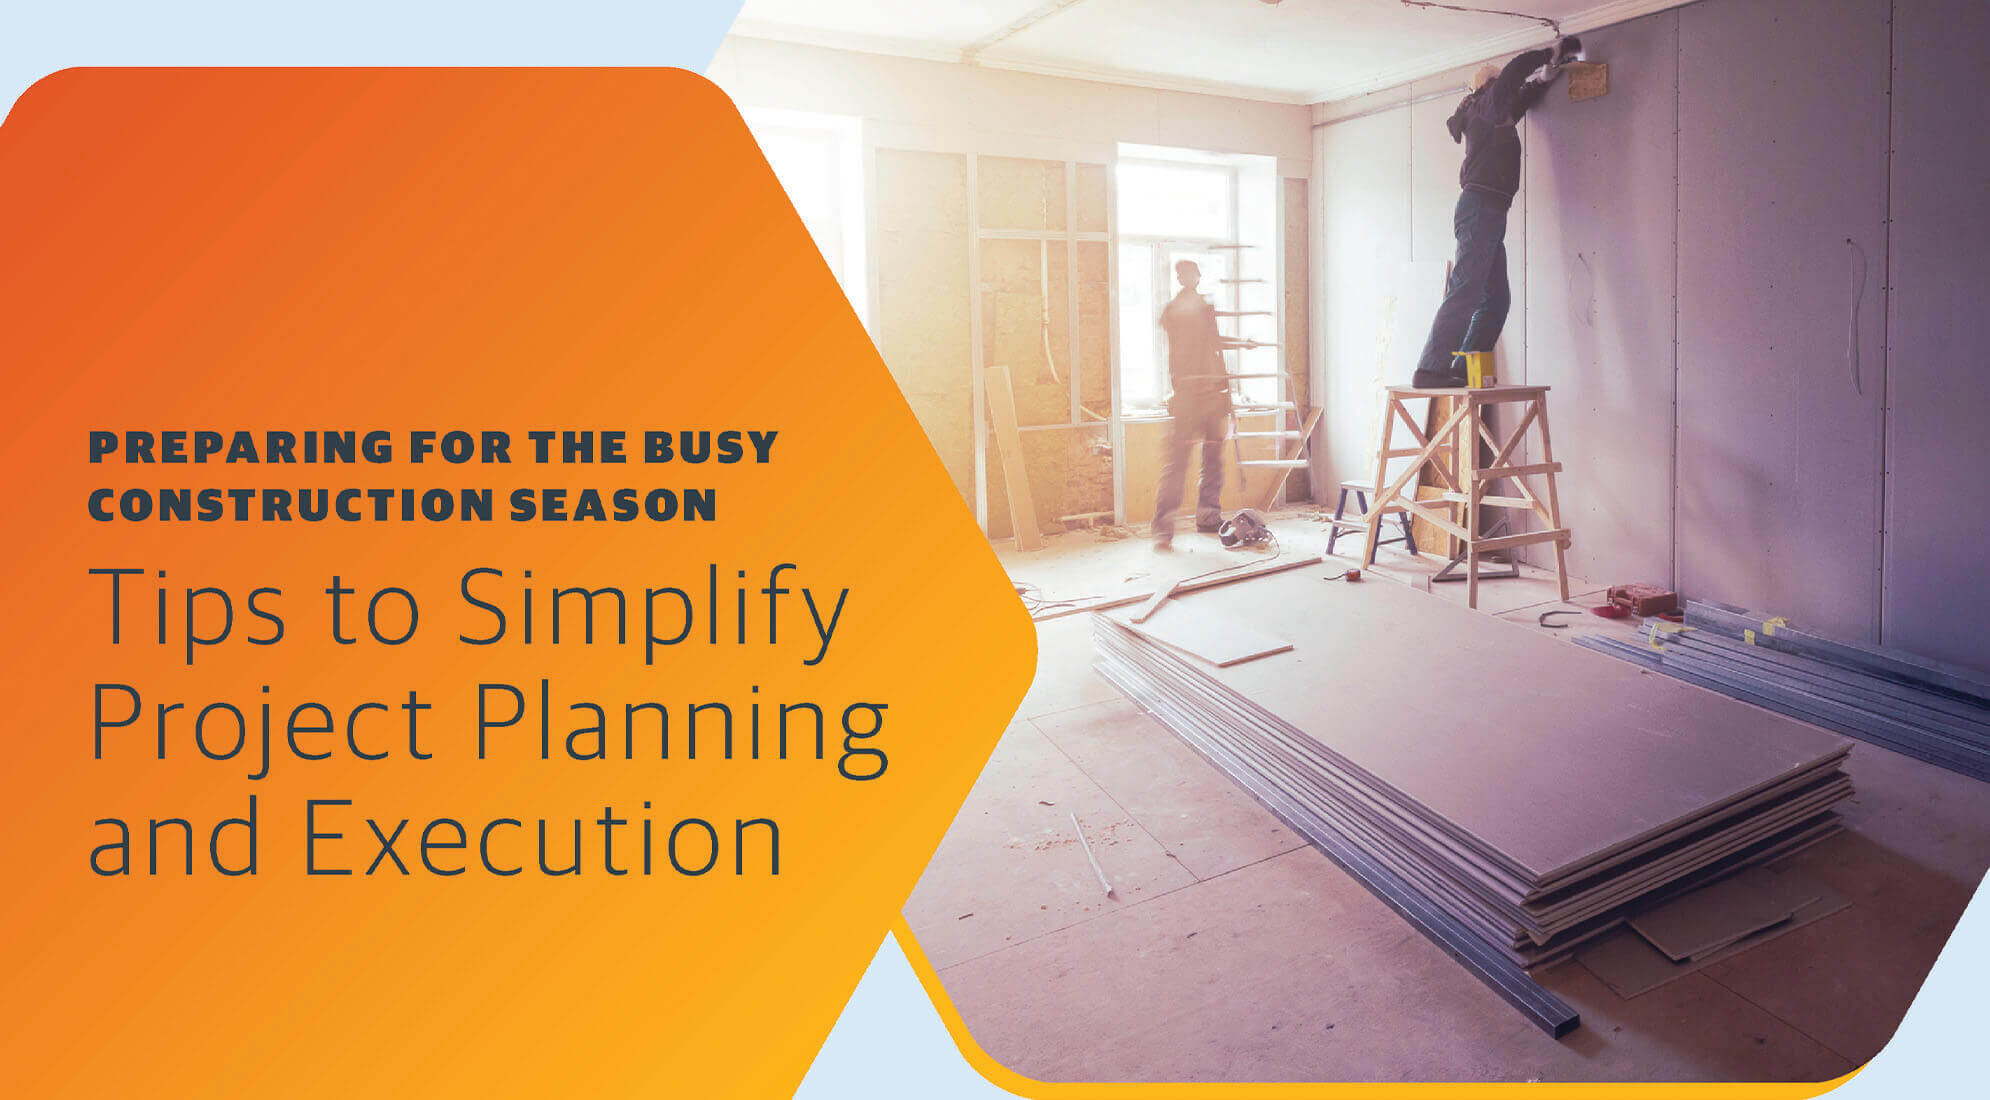 Tips to Simplify Construction Project Planning and Execution 1